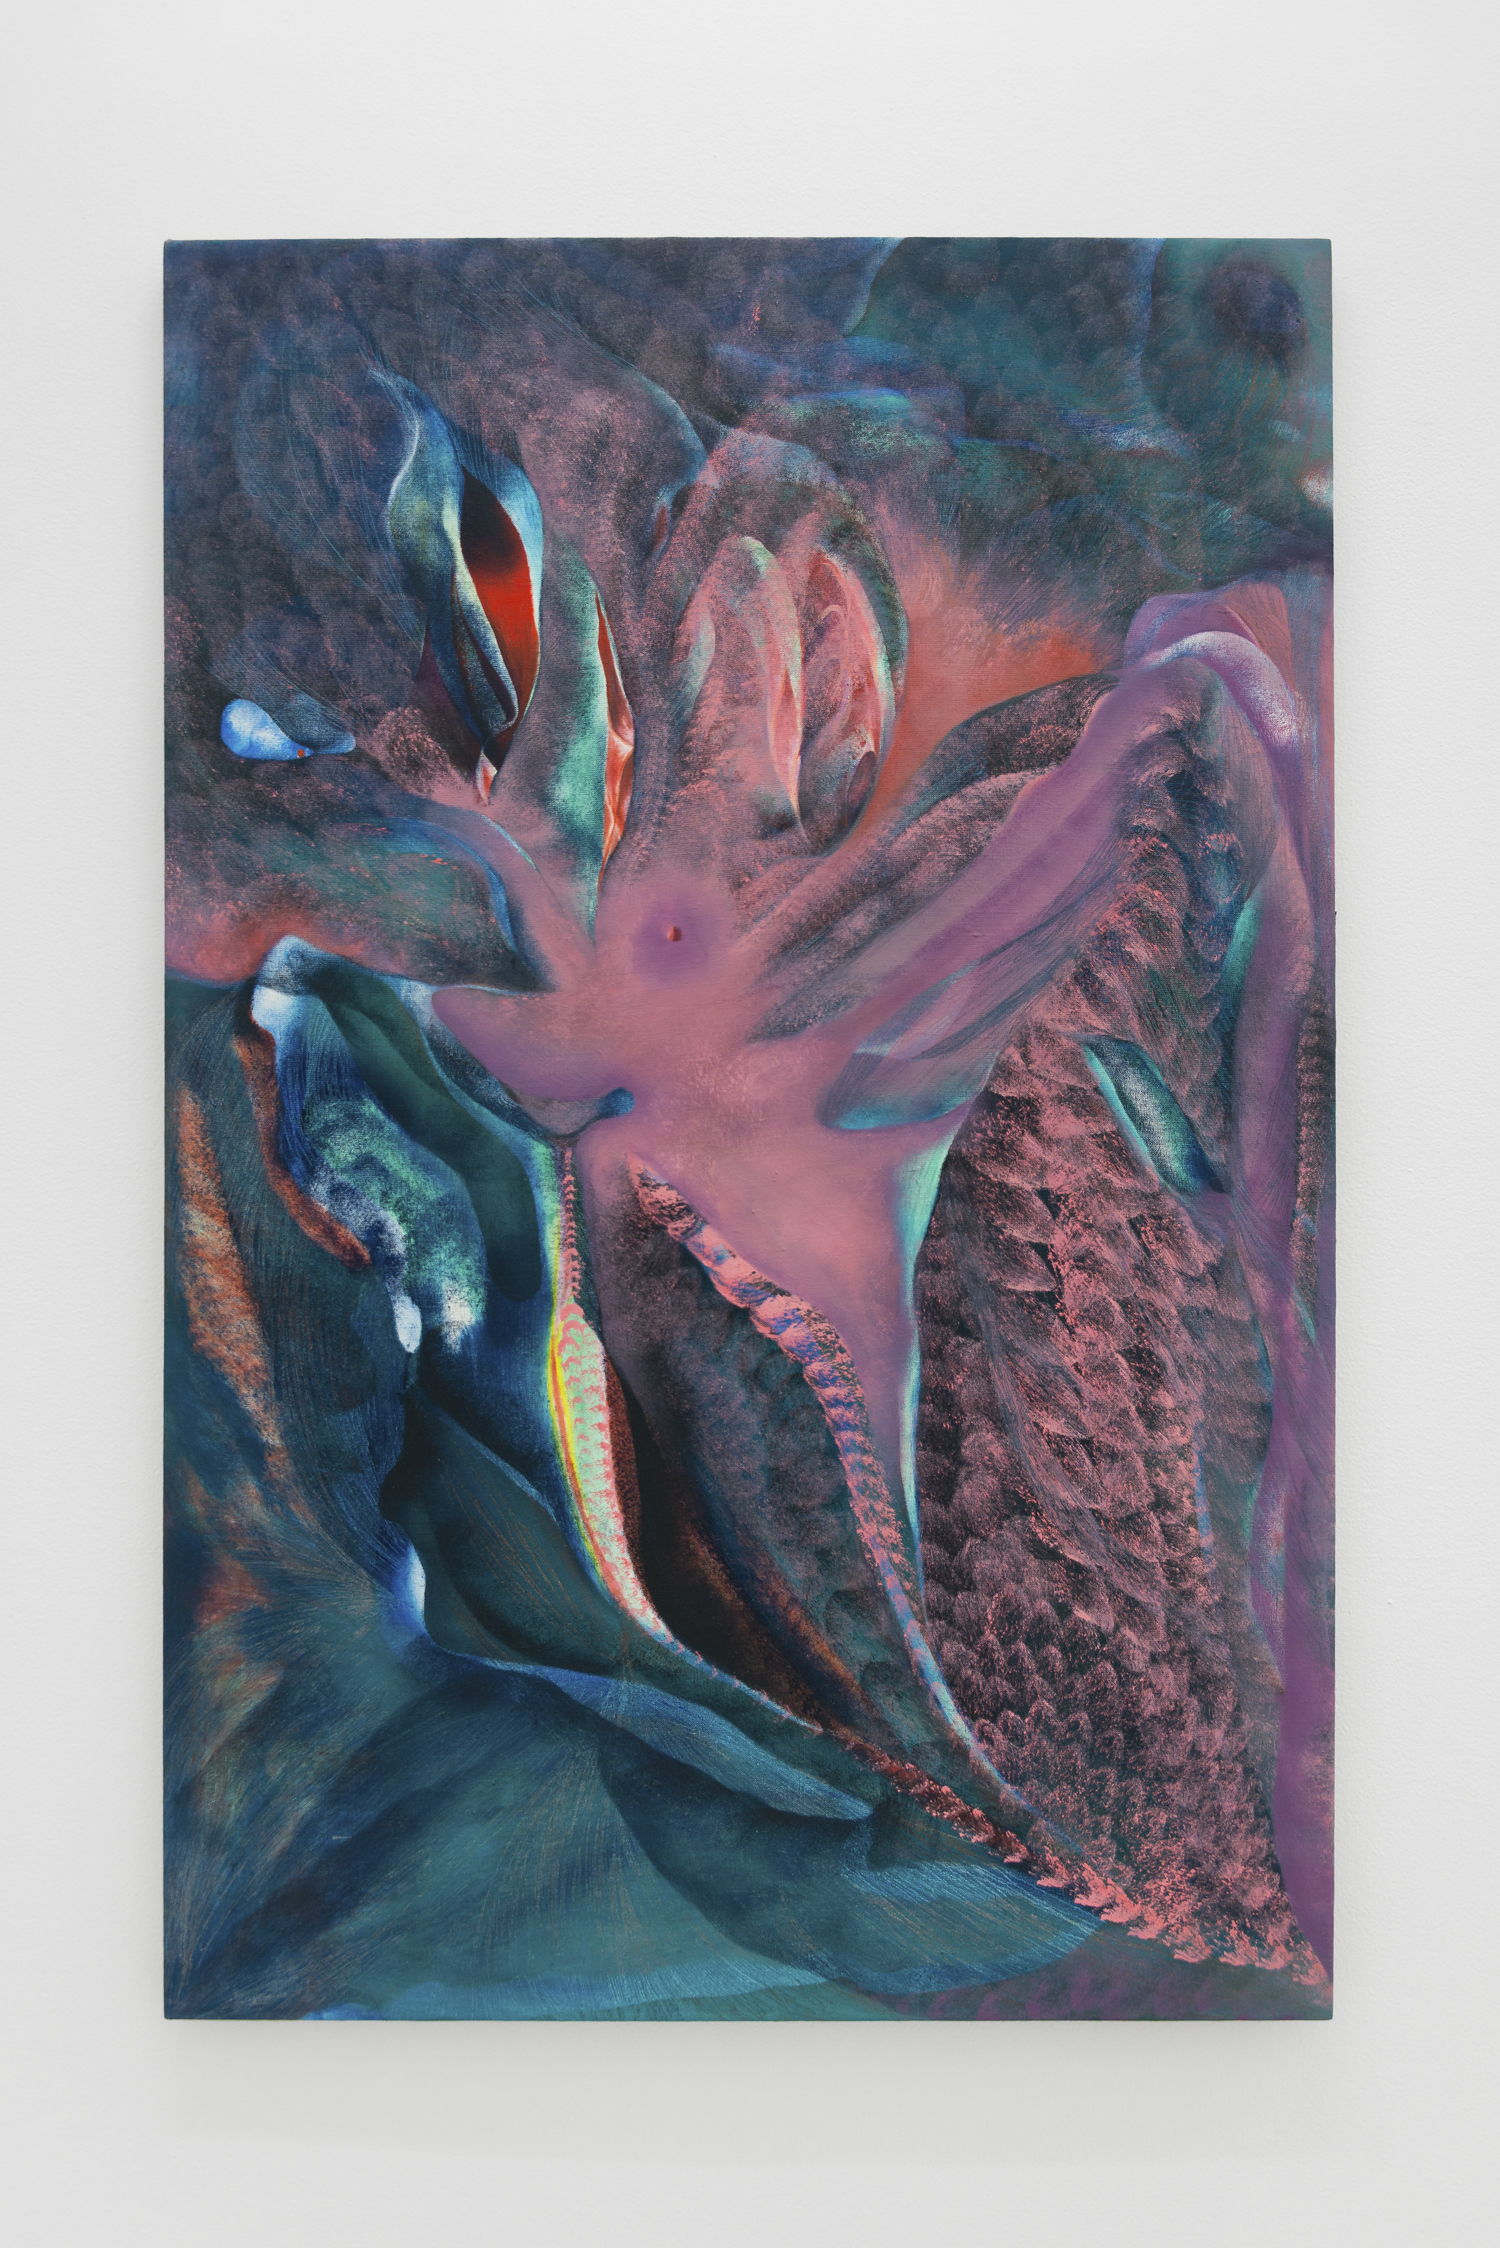  Lucy Bull,  In Praise of Tears , 2019, Oil on linen, 49.5 x 32.5 inches 